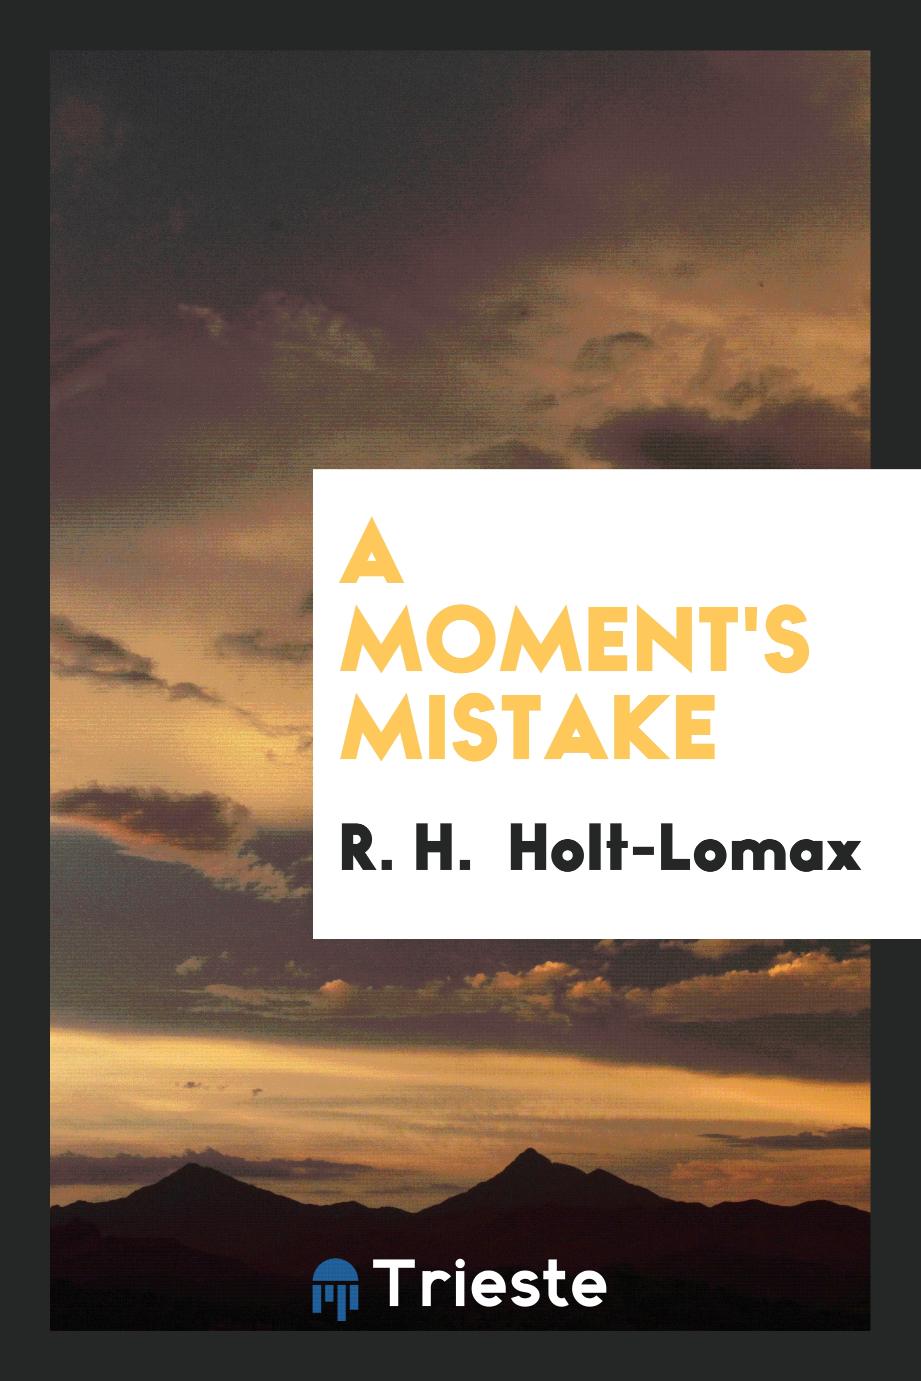 A Moment's Mistake